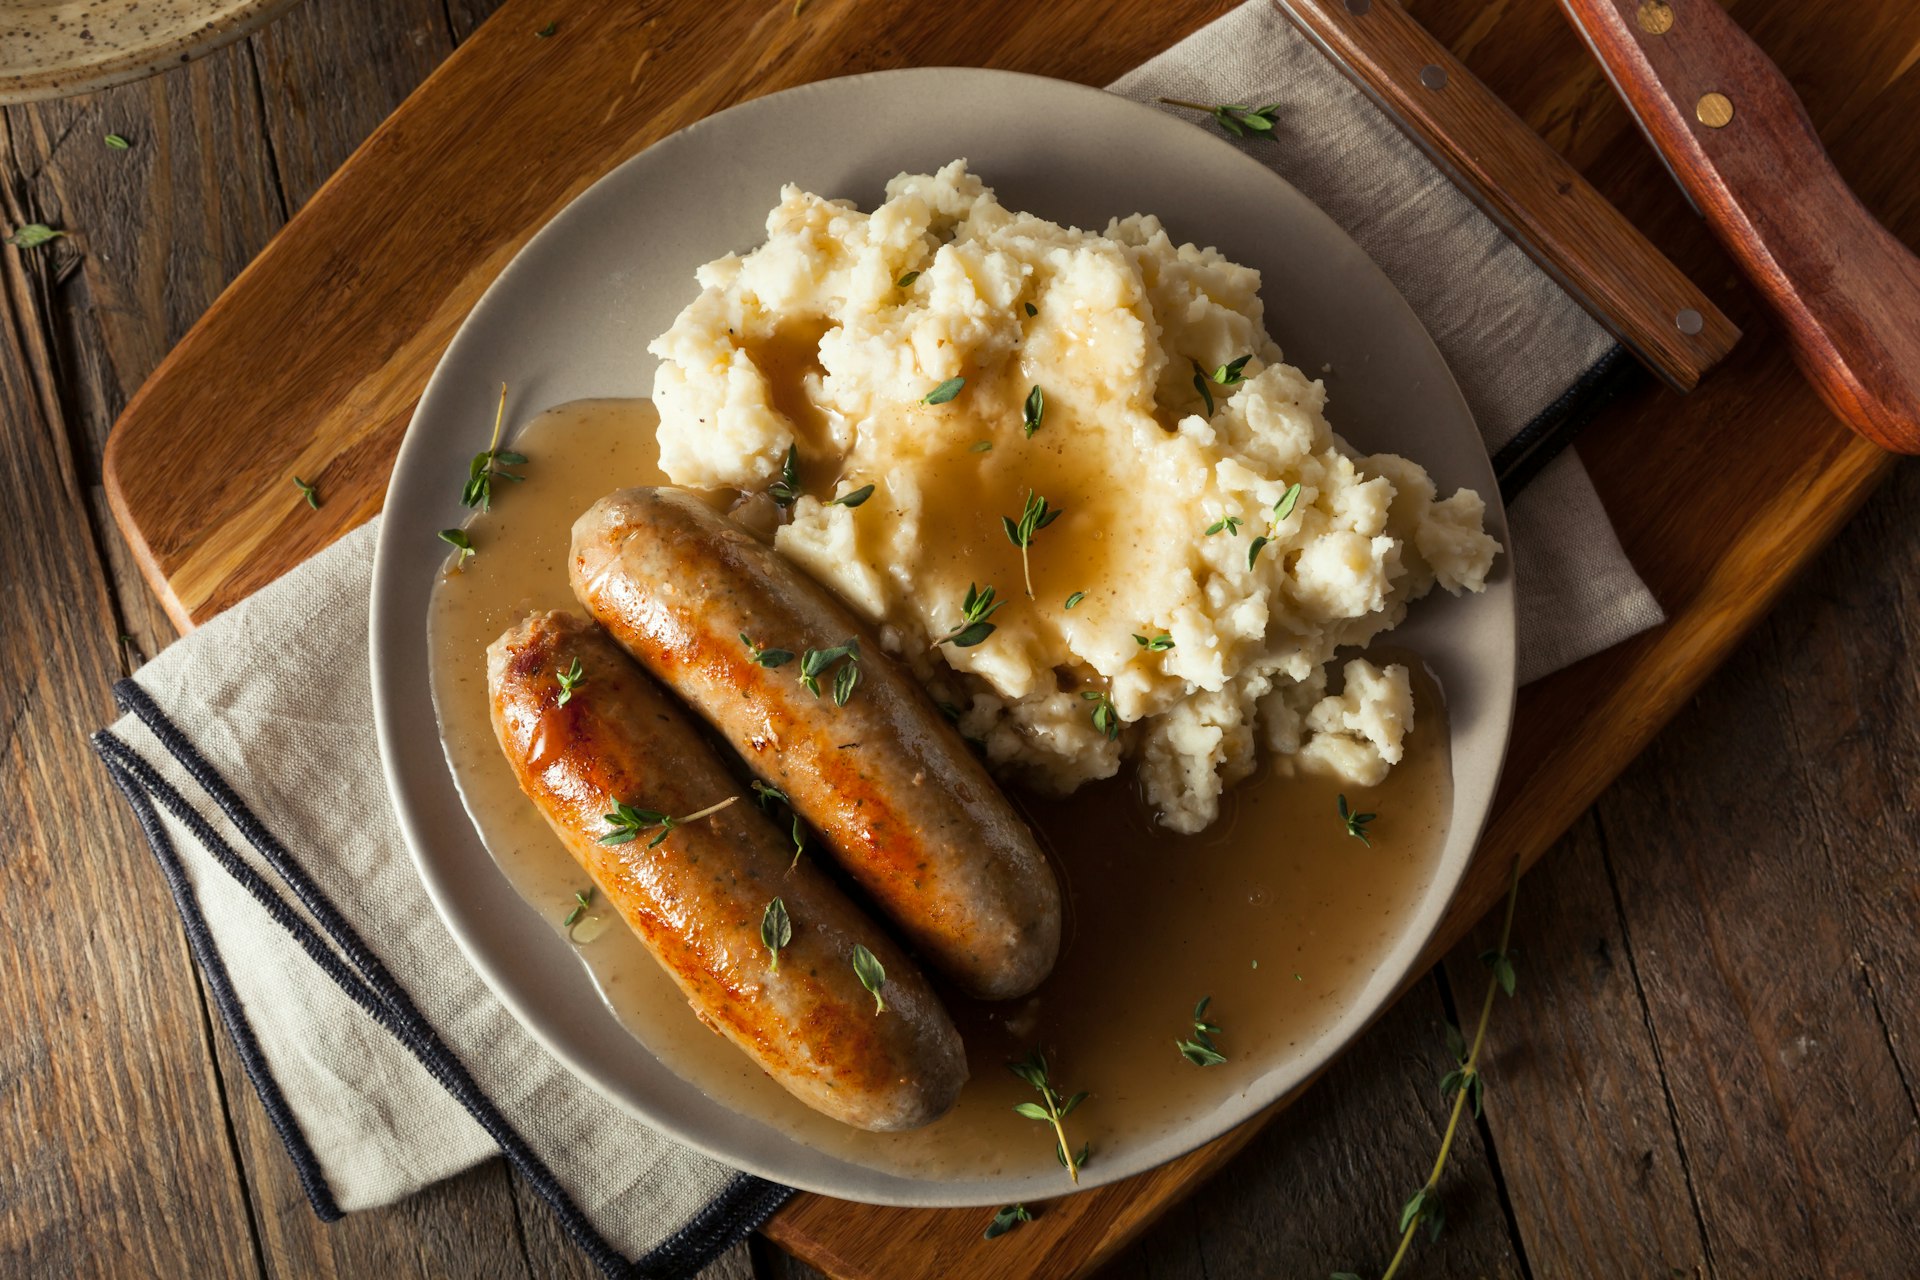 Homemade bangers and mash with herbs and gravy